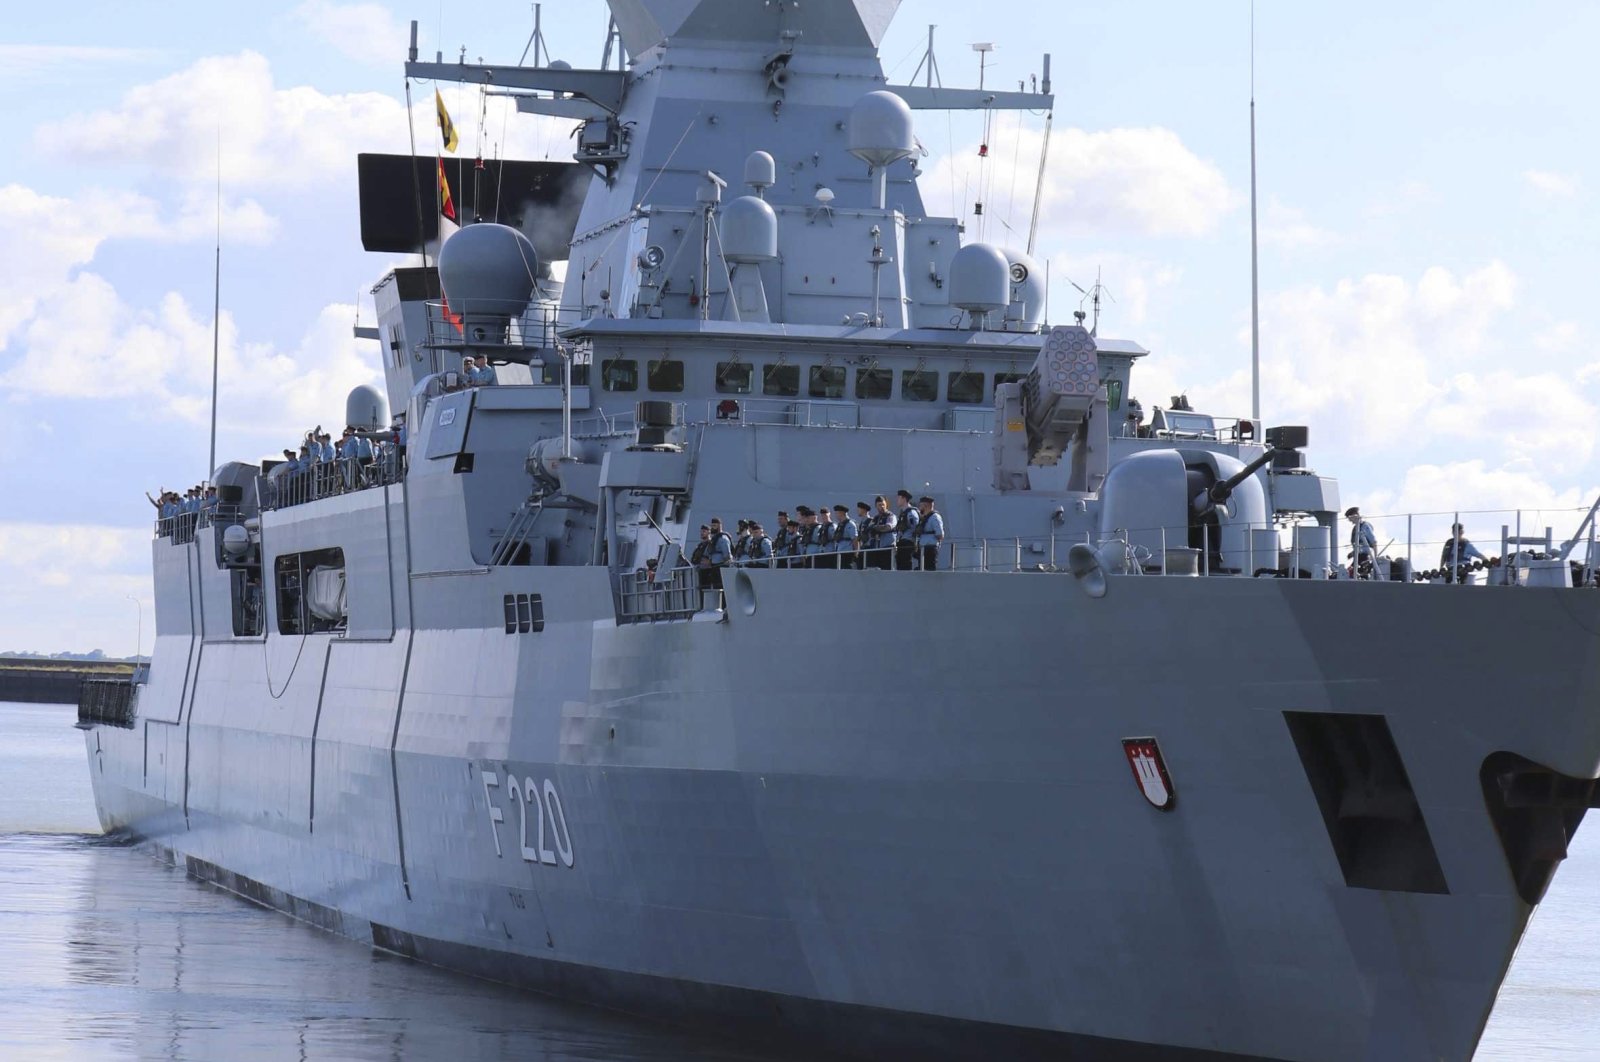 German frigate Hamburg, which is taking part in Operation Irini, on Sept. 11, 2020 (File Photo)